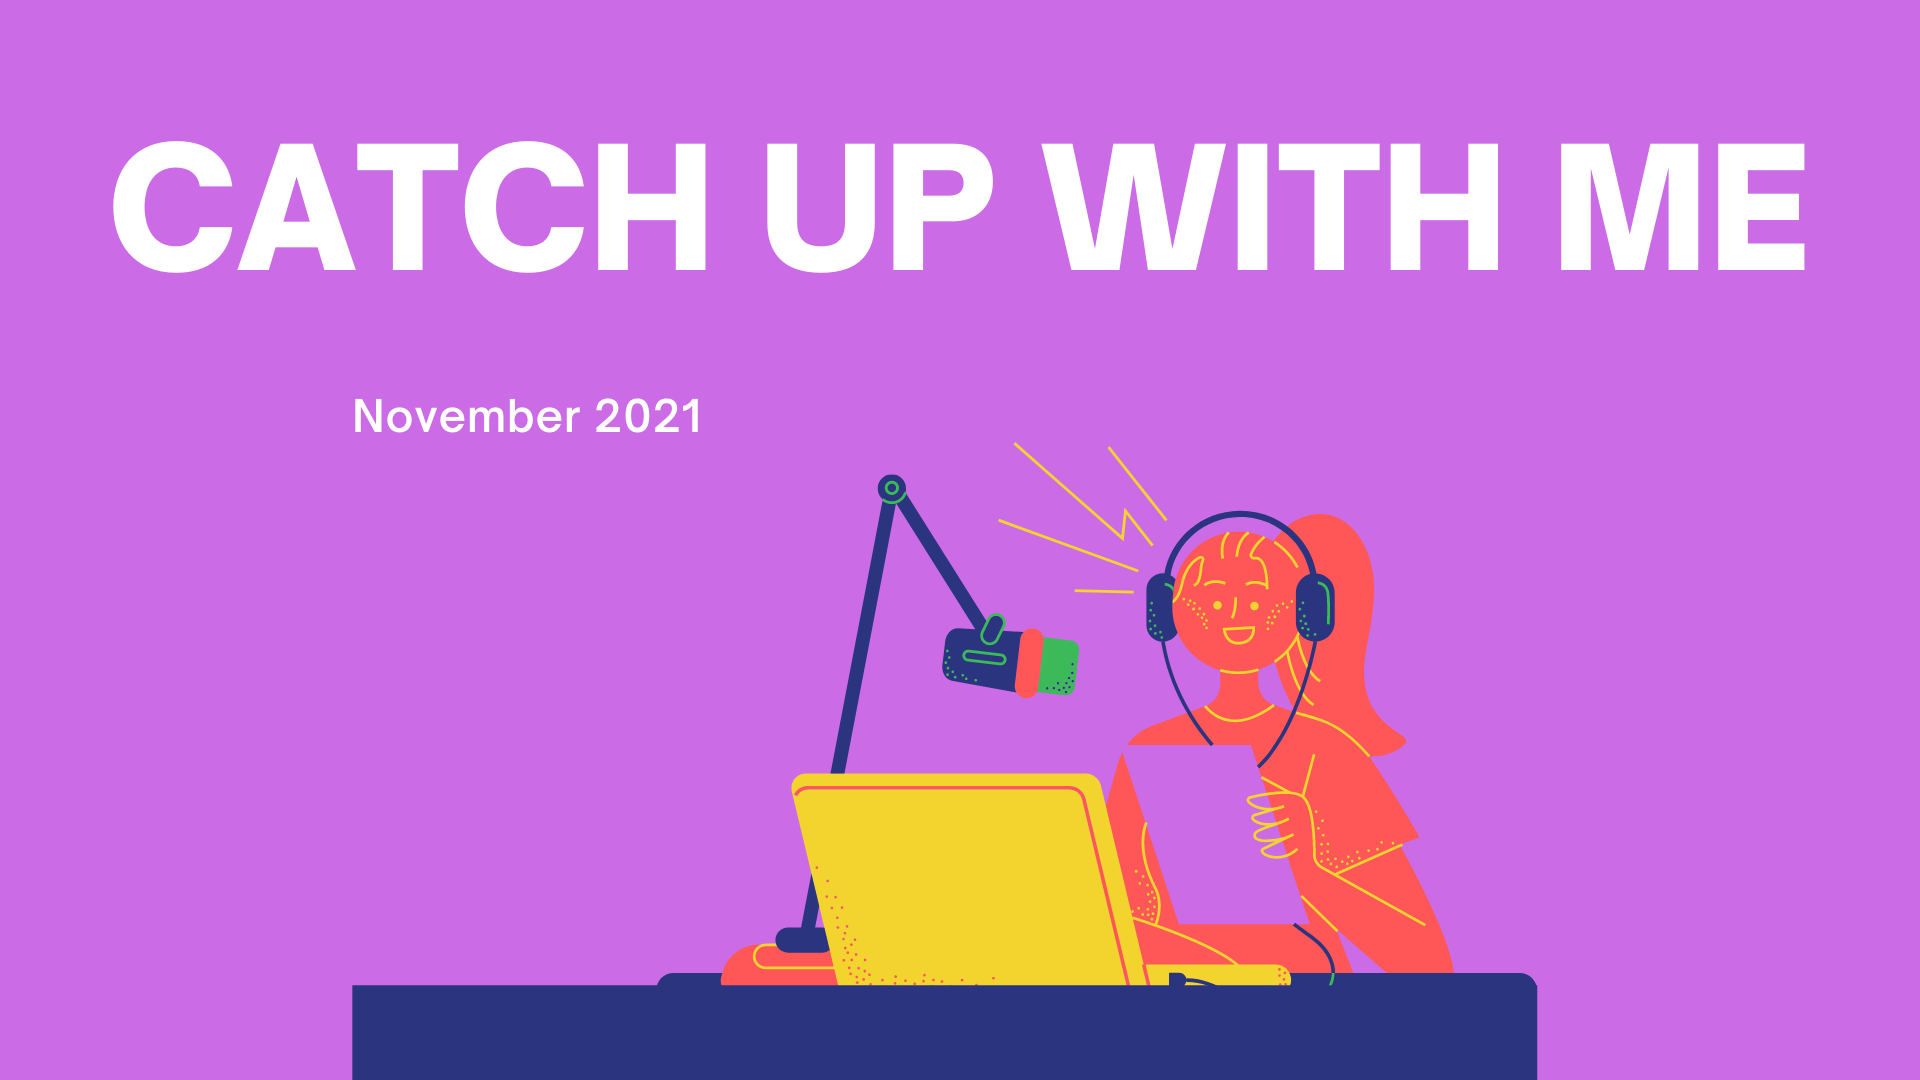 Catch up with me - November 2021